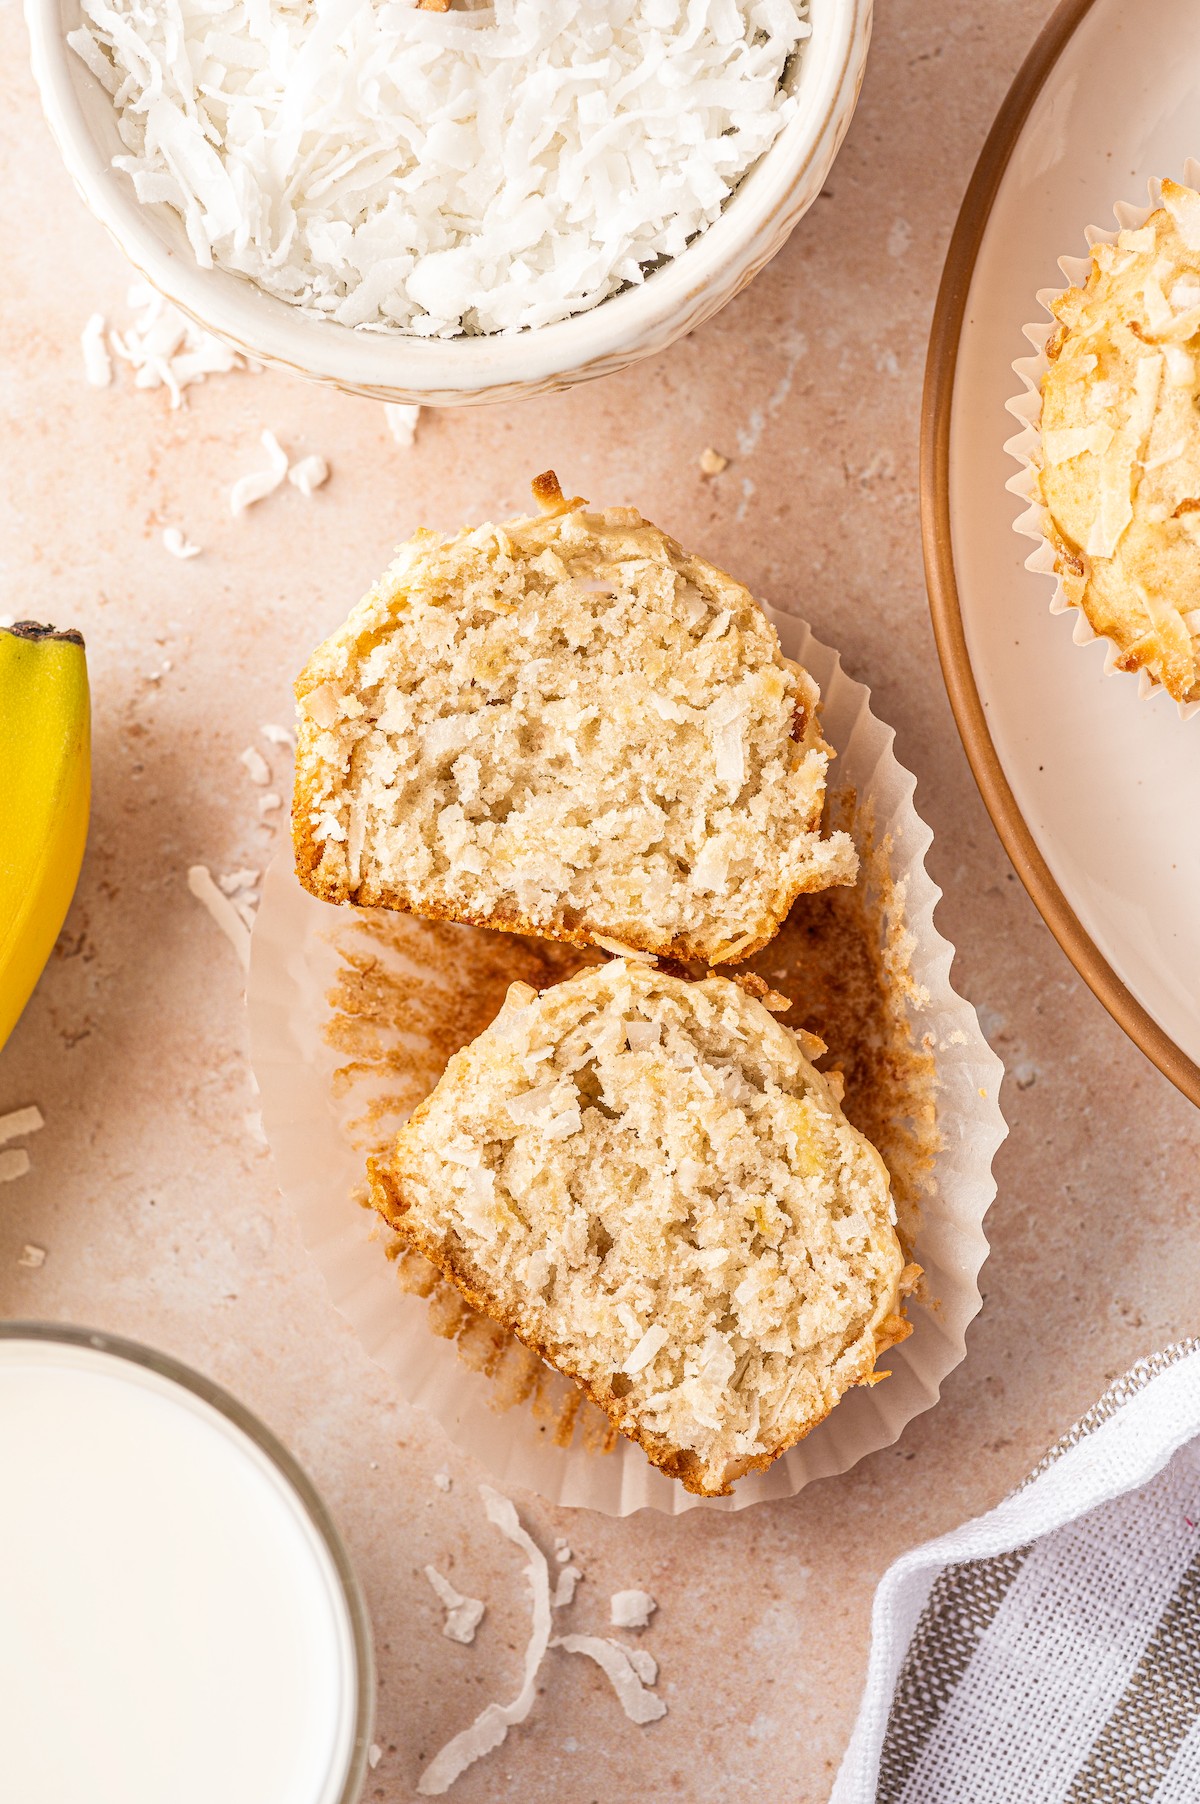 A coconut banana muffin sliced in half to see the inside.